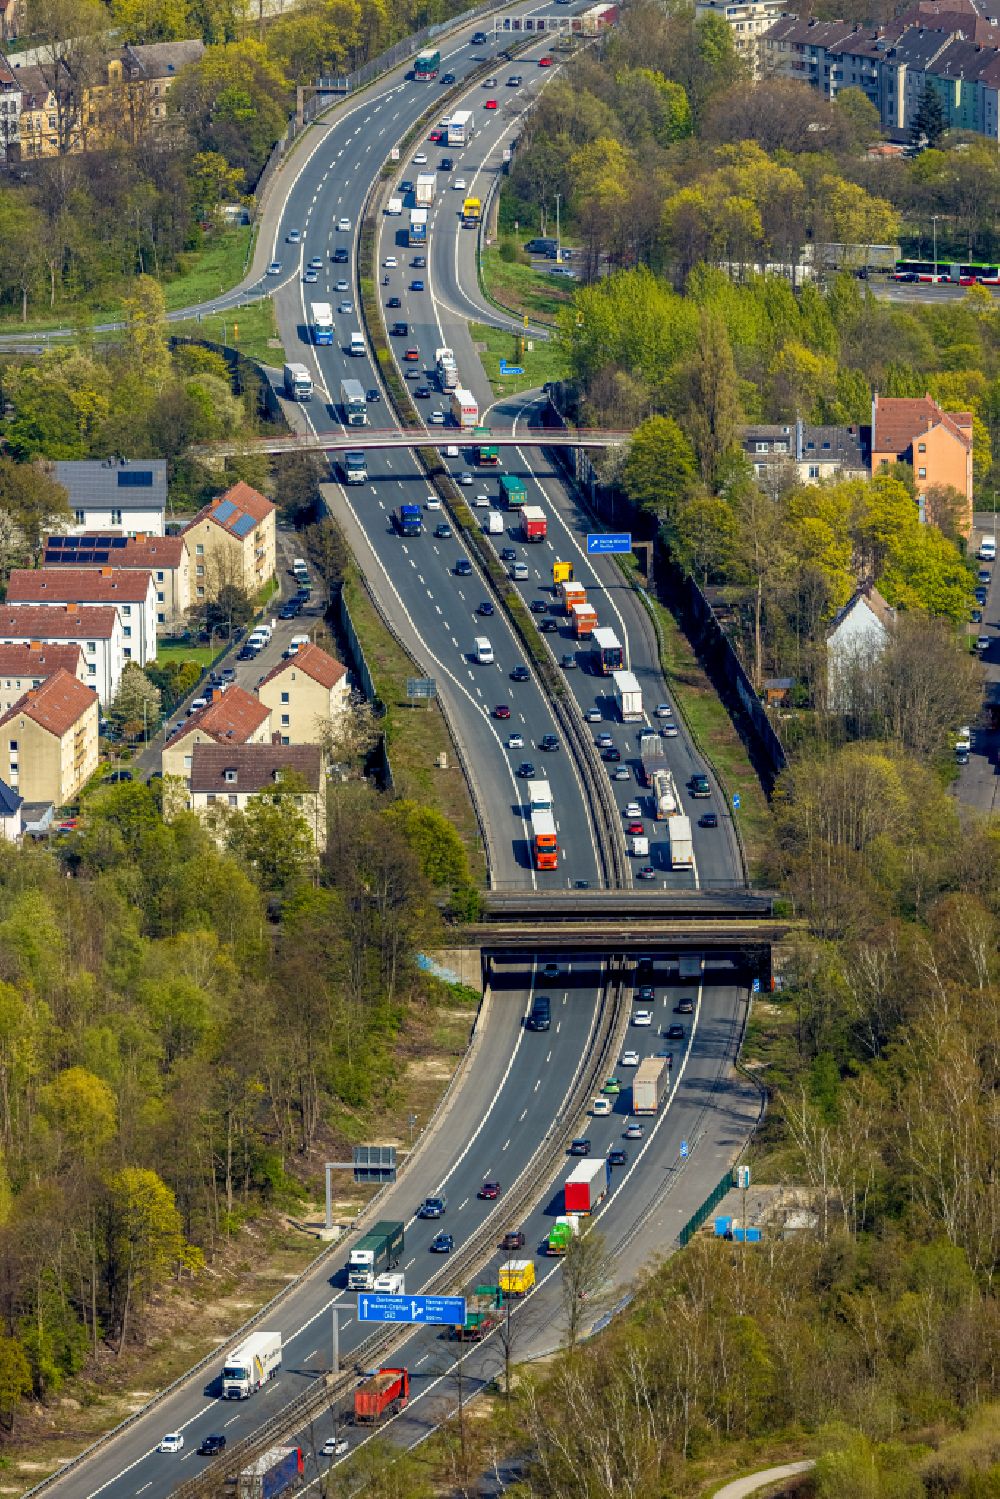 Herne from the bird's eye view: Lorries crowded in traffic jams in the lanes of the route of the motorway BAB A42 in the district Wanne-Eickel in Herne at Ruhrgebiet in the state North Rhine-Westphalia, Germany